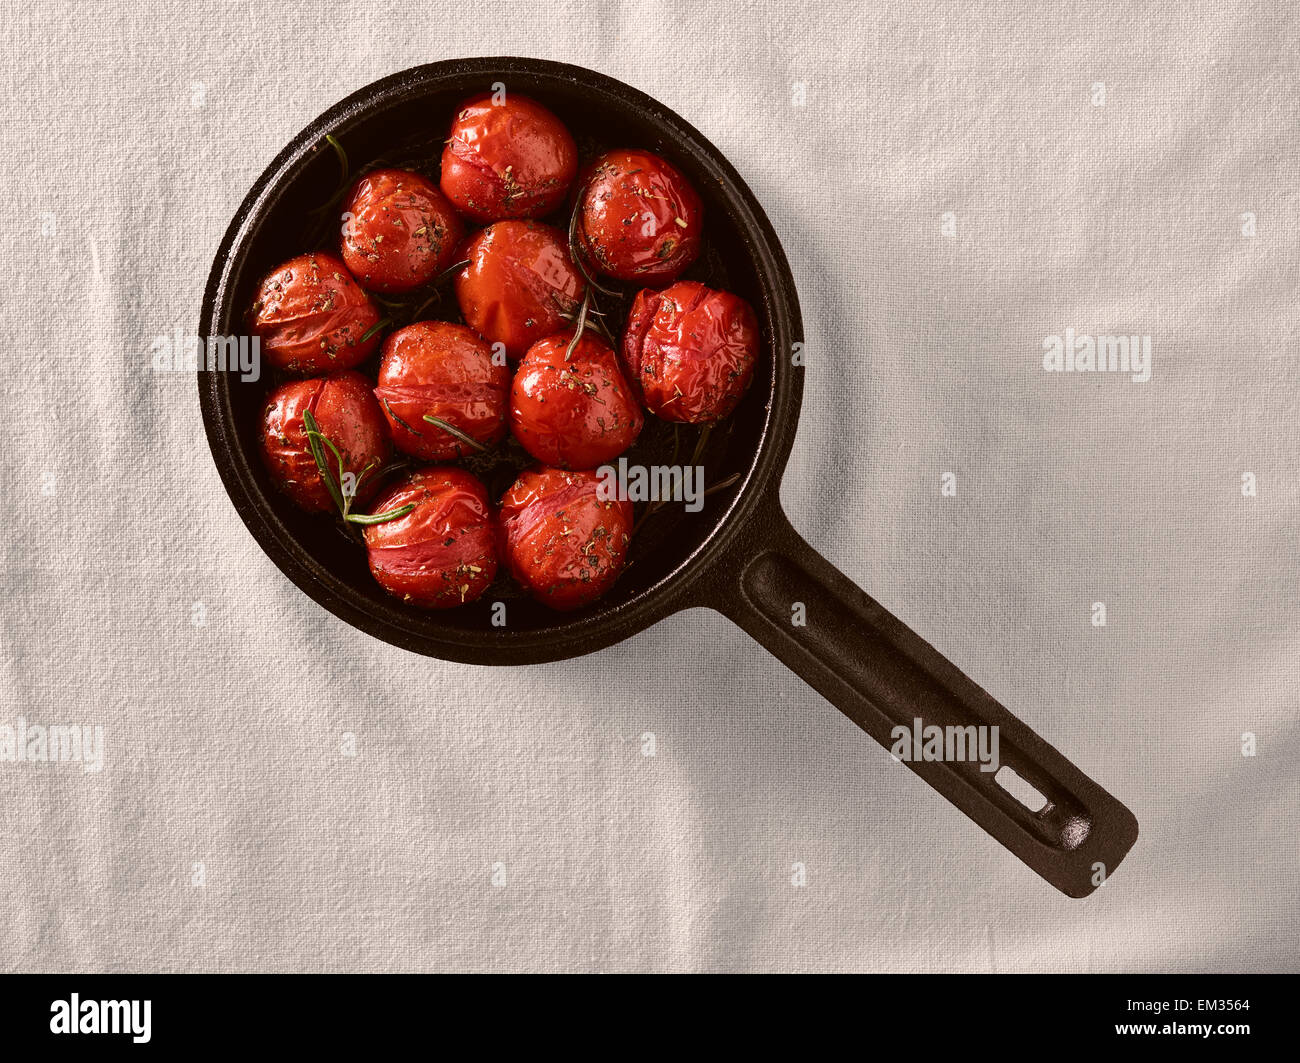 Grilled cherry tomatoes in a small cast iron pot, rosemary Stock Photo